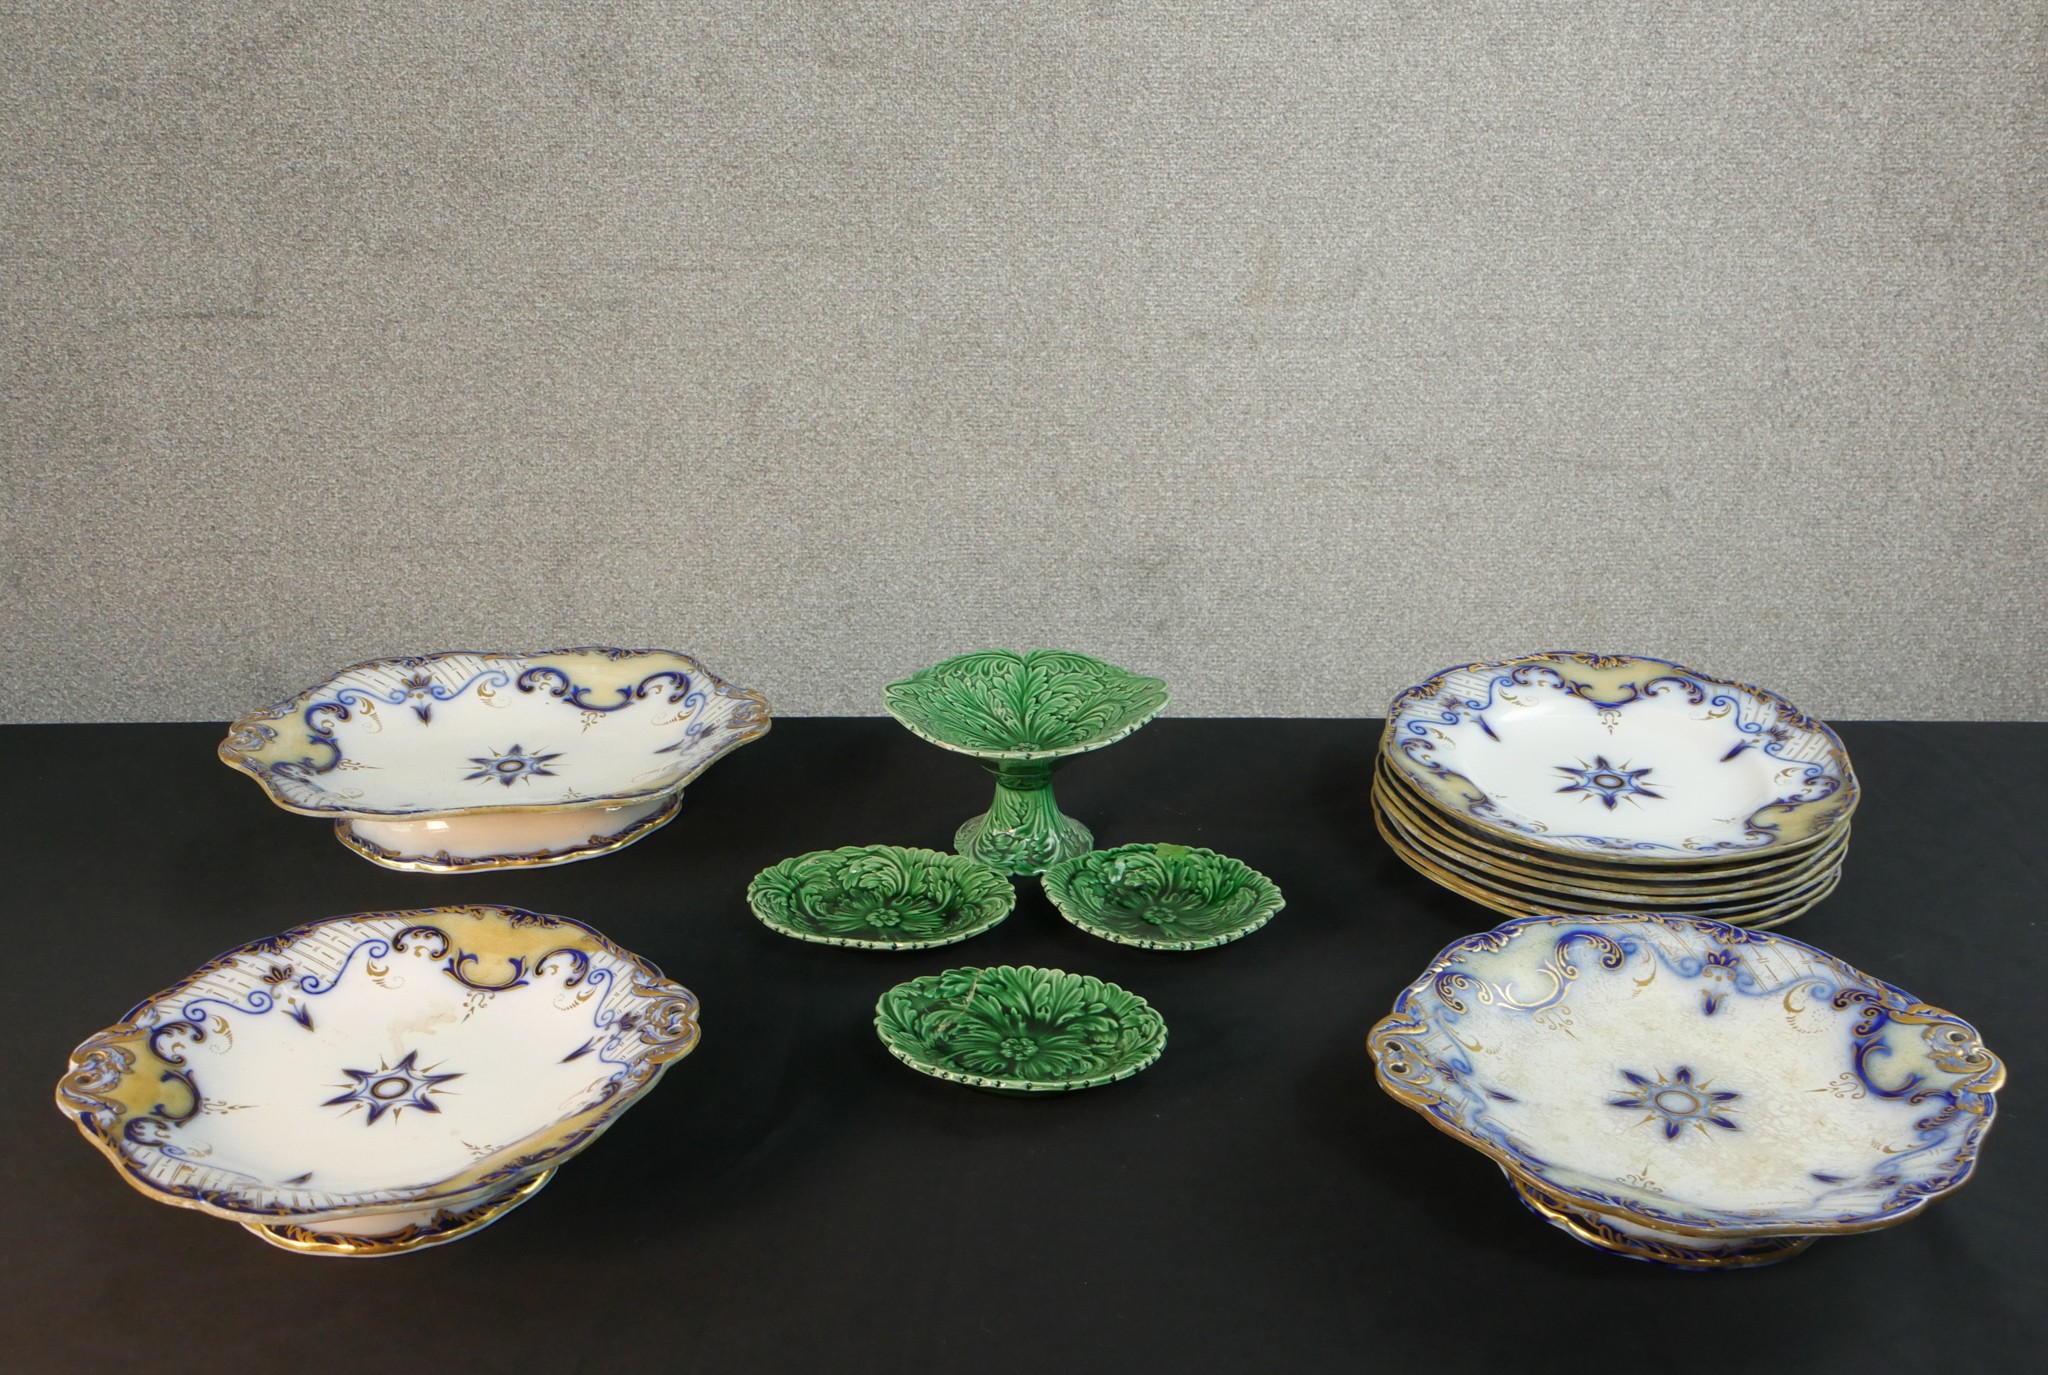 Three 19th century green glaze majolica leaf design plates along with a comport and a collection